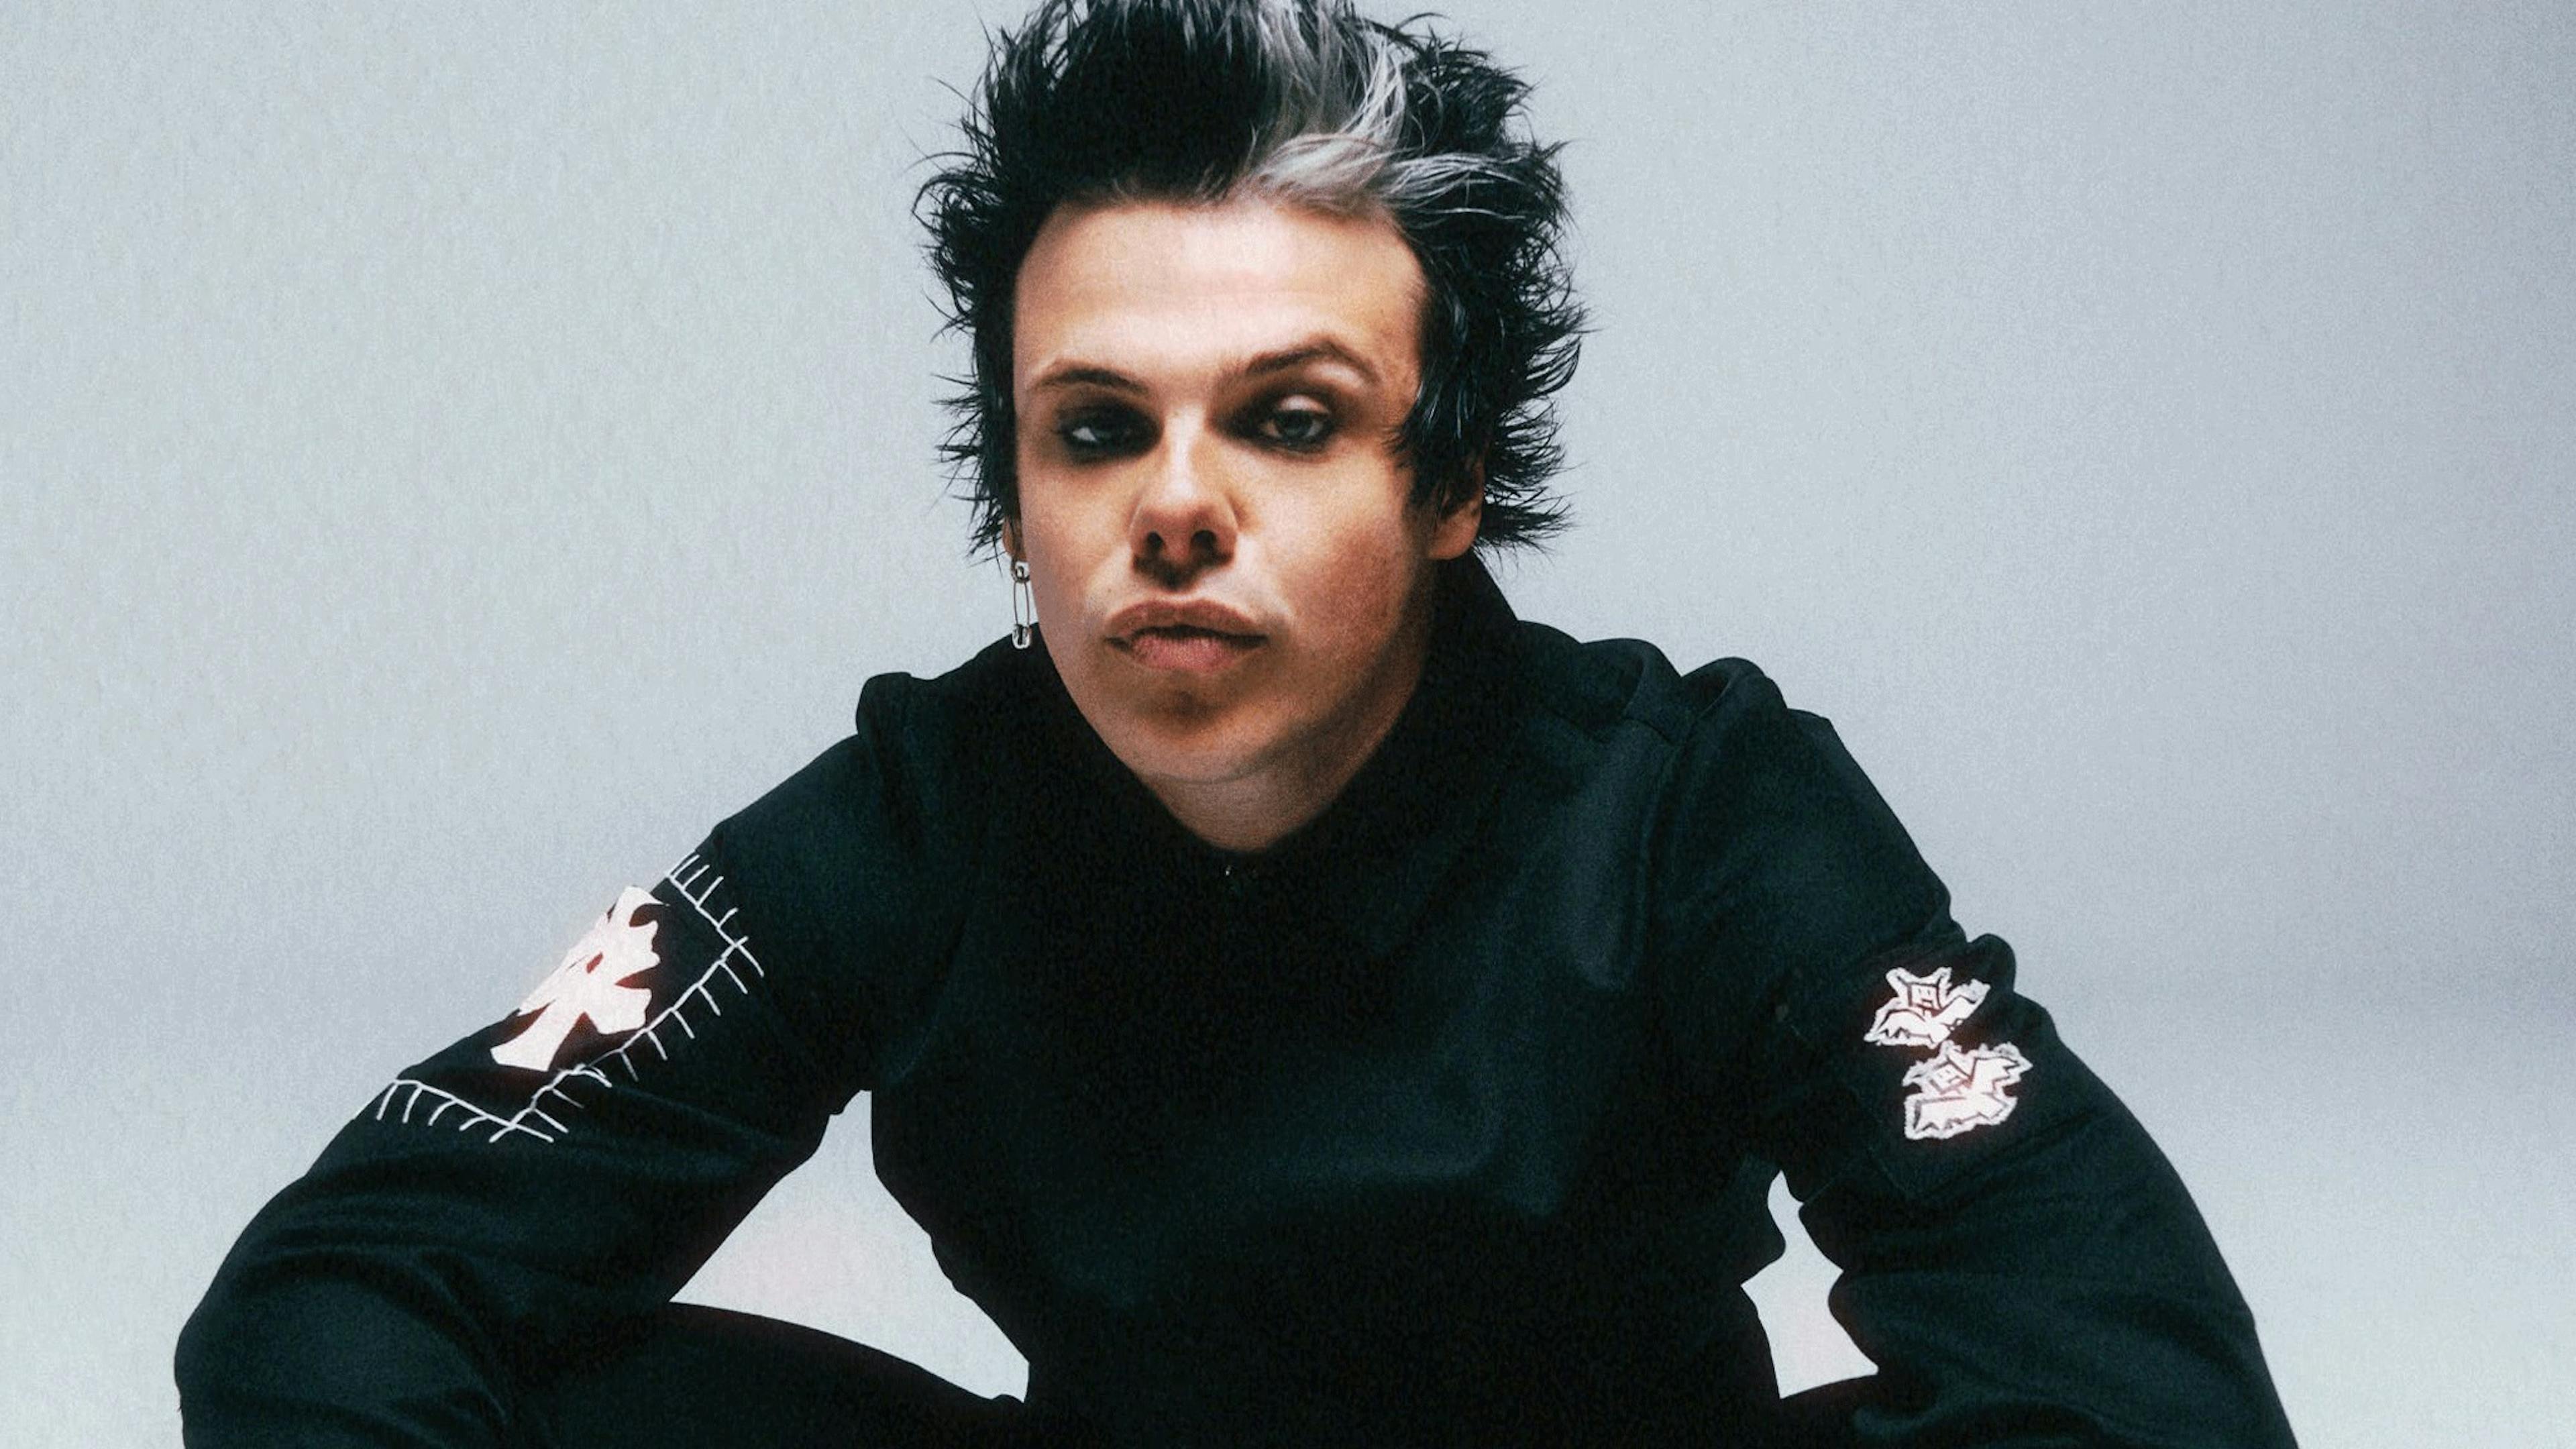 YUNGBLUD teases his “biggest announcement yet” with free outdoor show